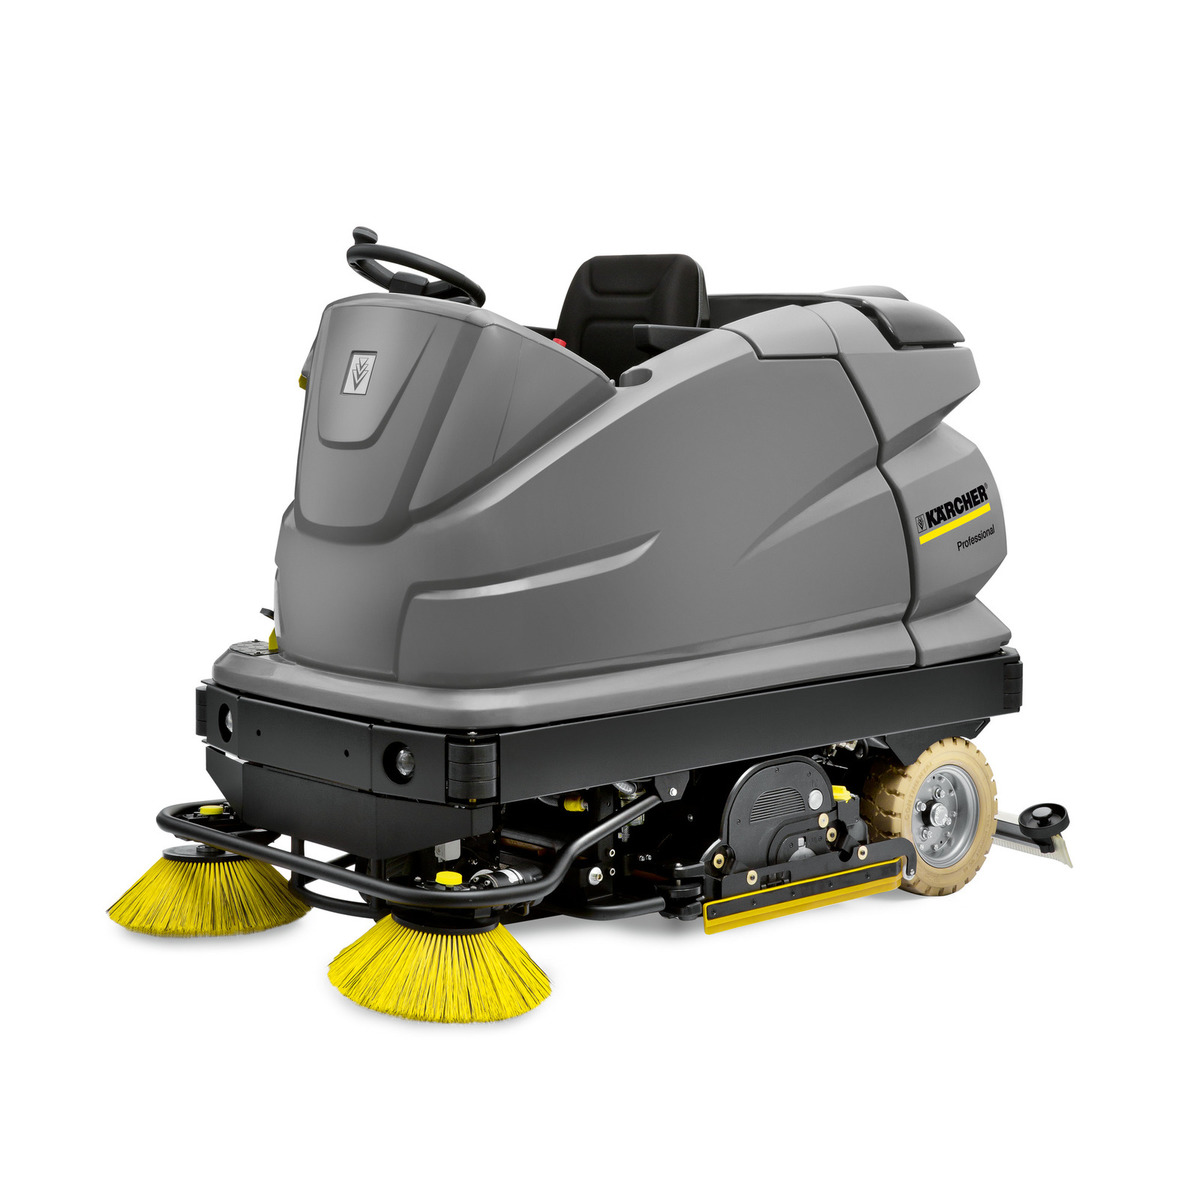 Karcher B 250 R Bp Ride-On Auto Scrubber karcher, b, 250, R, BP, Ride, ride-on, auto-scrubber, scrubber, scrub, floor, cleaning, large-area, facility, professional, commercial, industrial, janitorial, maintenance, 